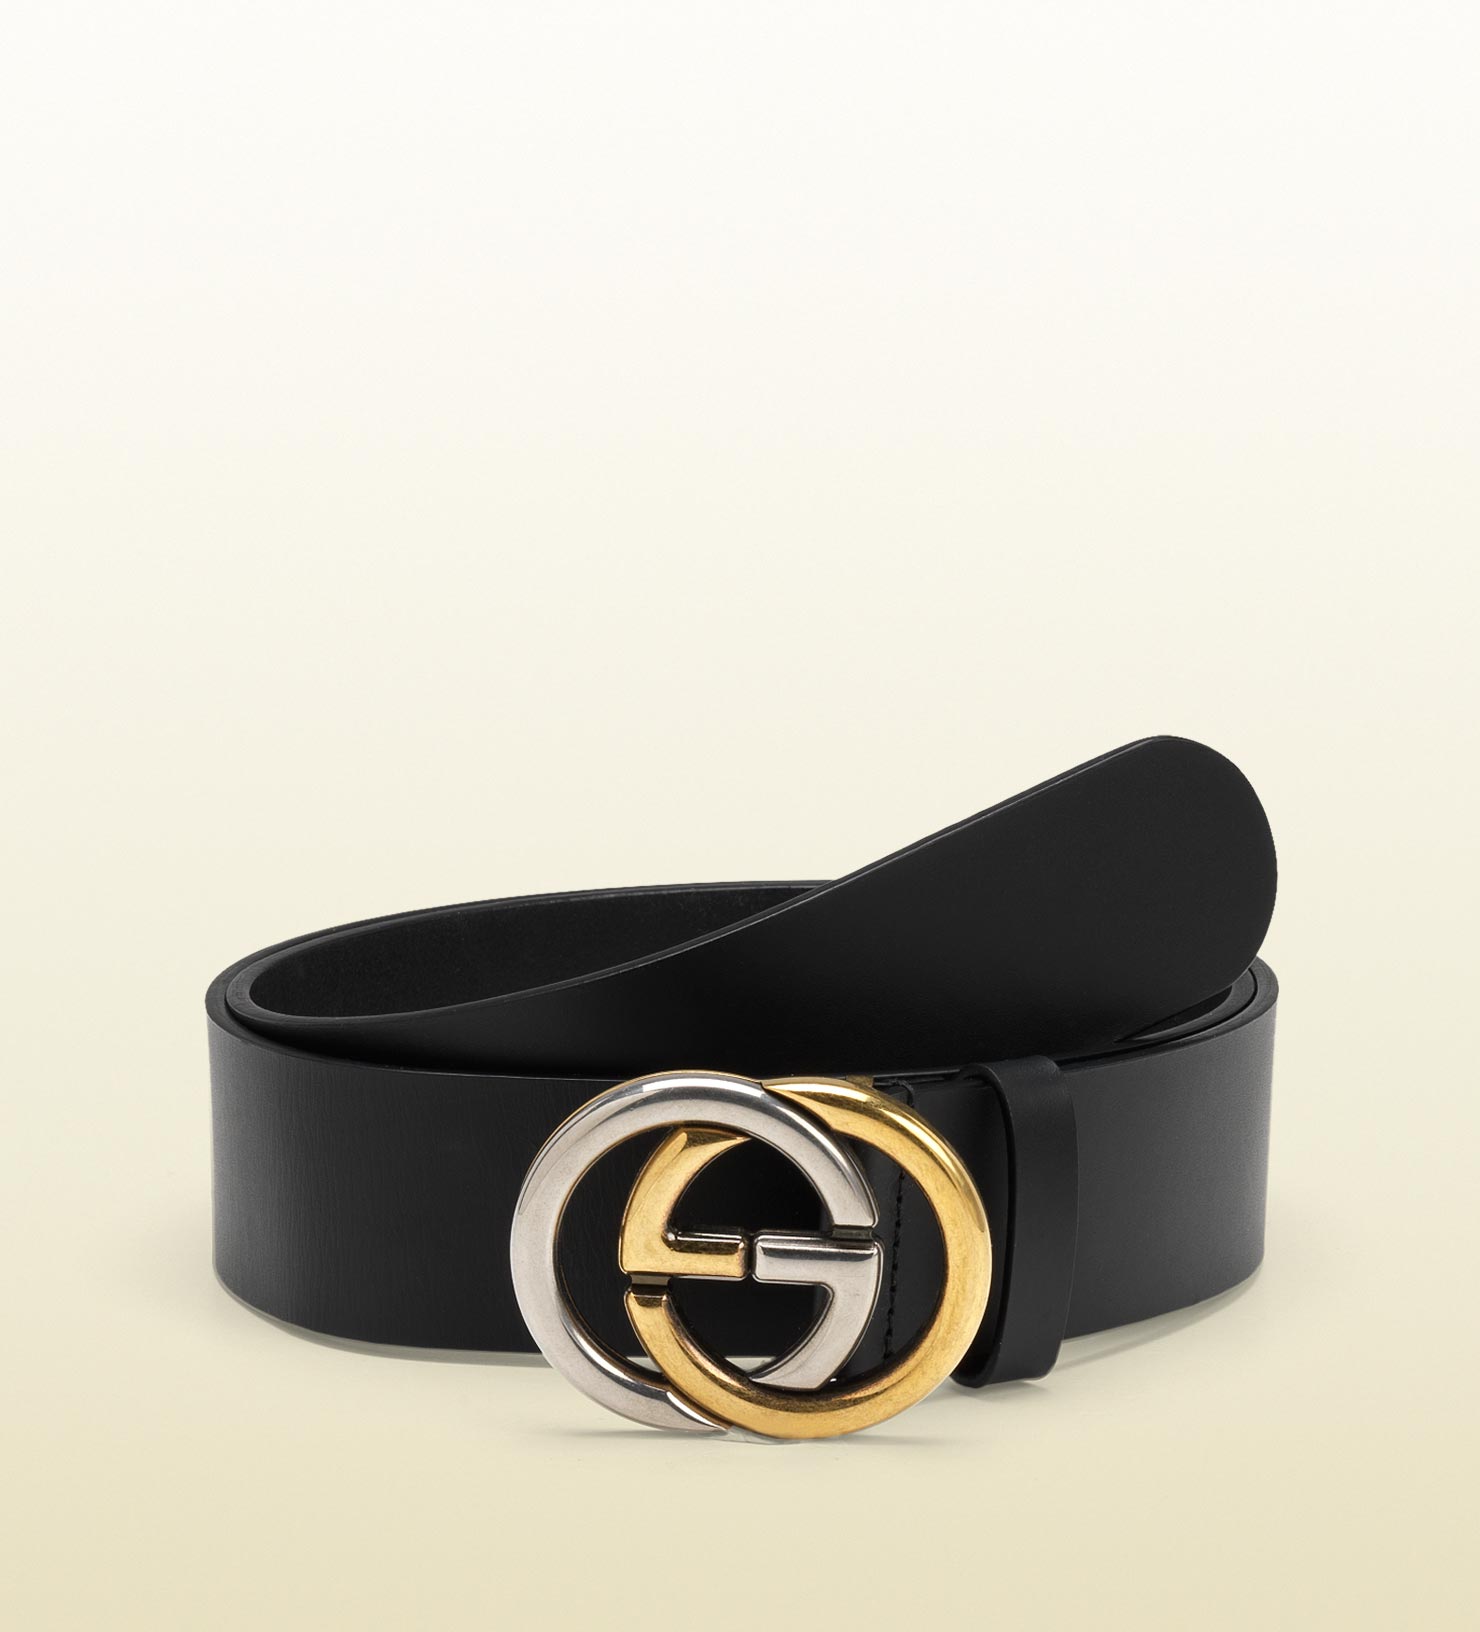 Lyst - Gucci Leather Belt With Bi-color Interlocking G Buckle in Black